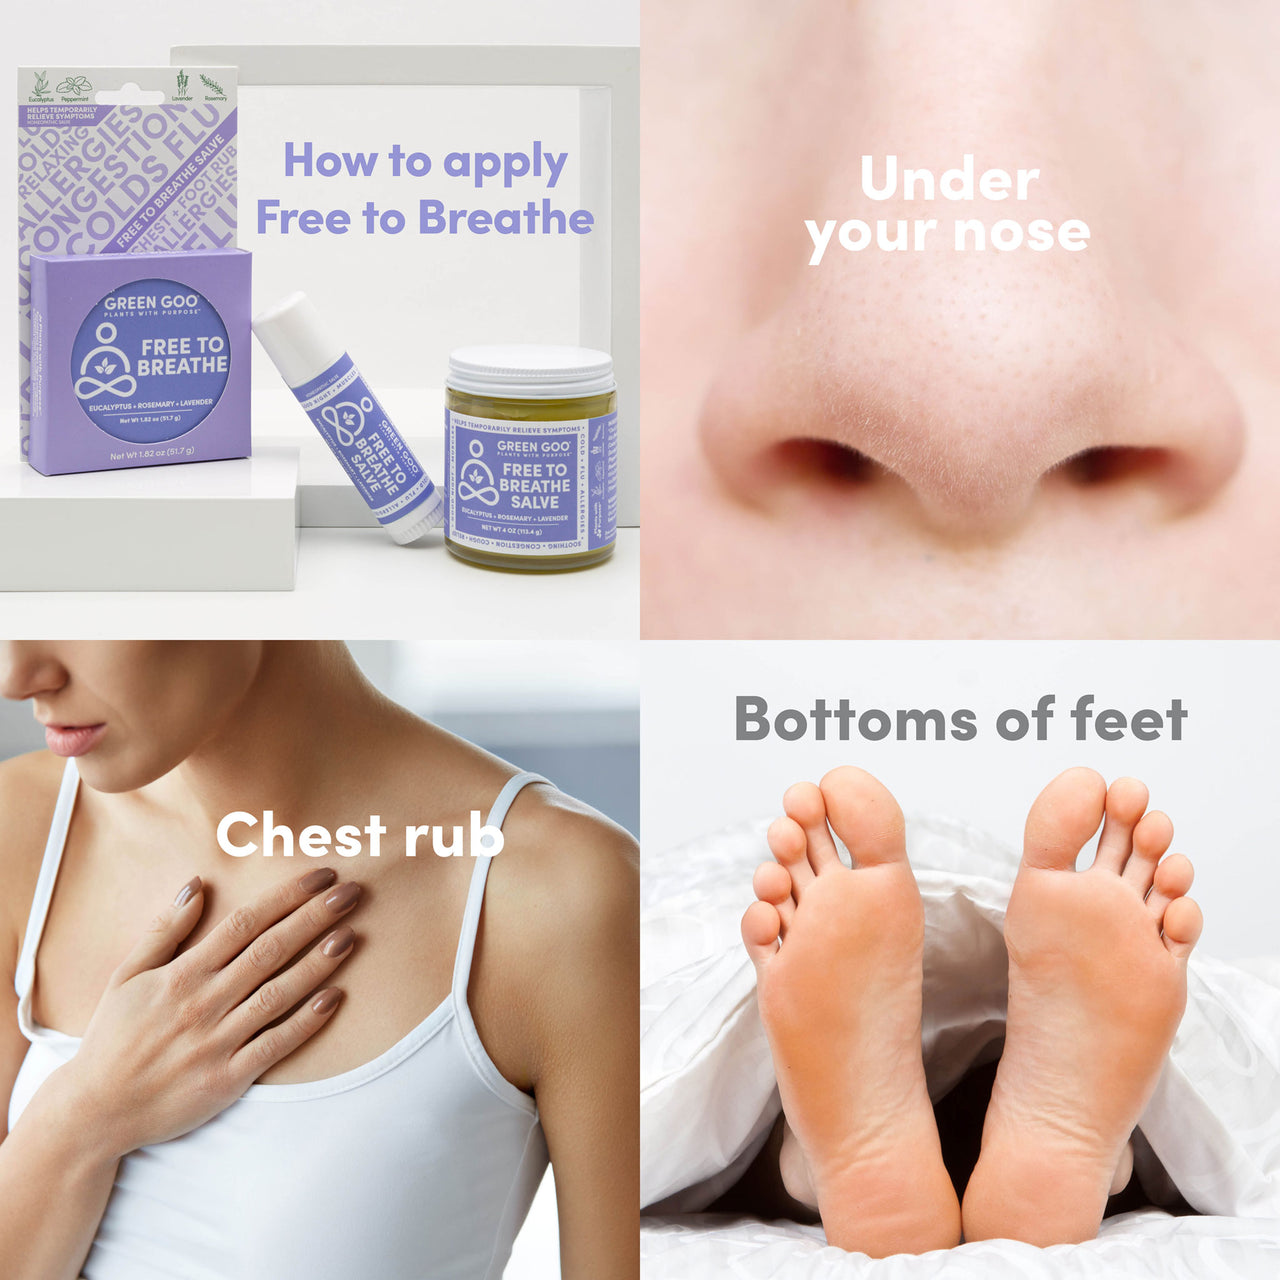 Apply Free to Breathe under your nose, on your chest, and to the bottoms of your feet.